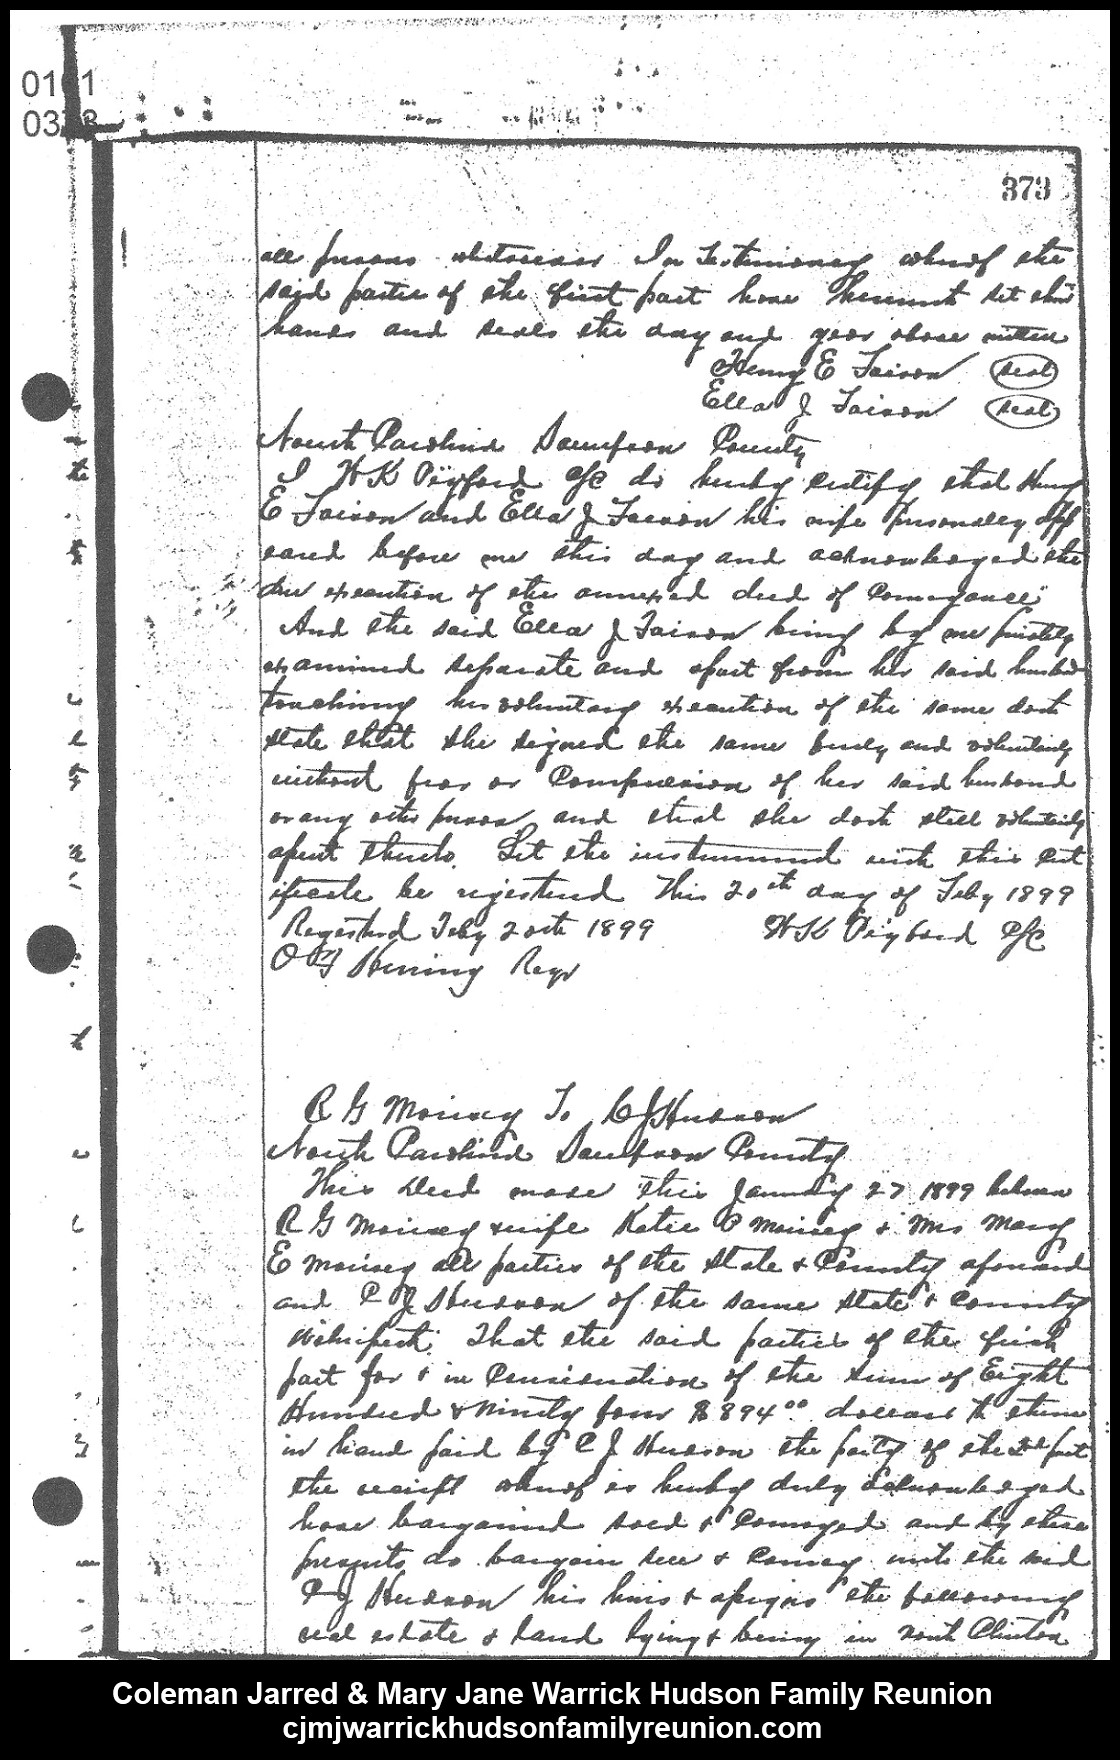 1899, 2-21 - Deed - R. G. Morisey to C. J. (Page 1 of 3)